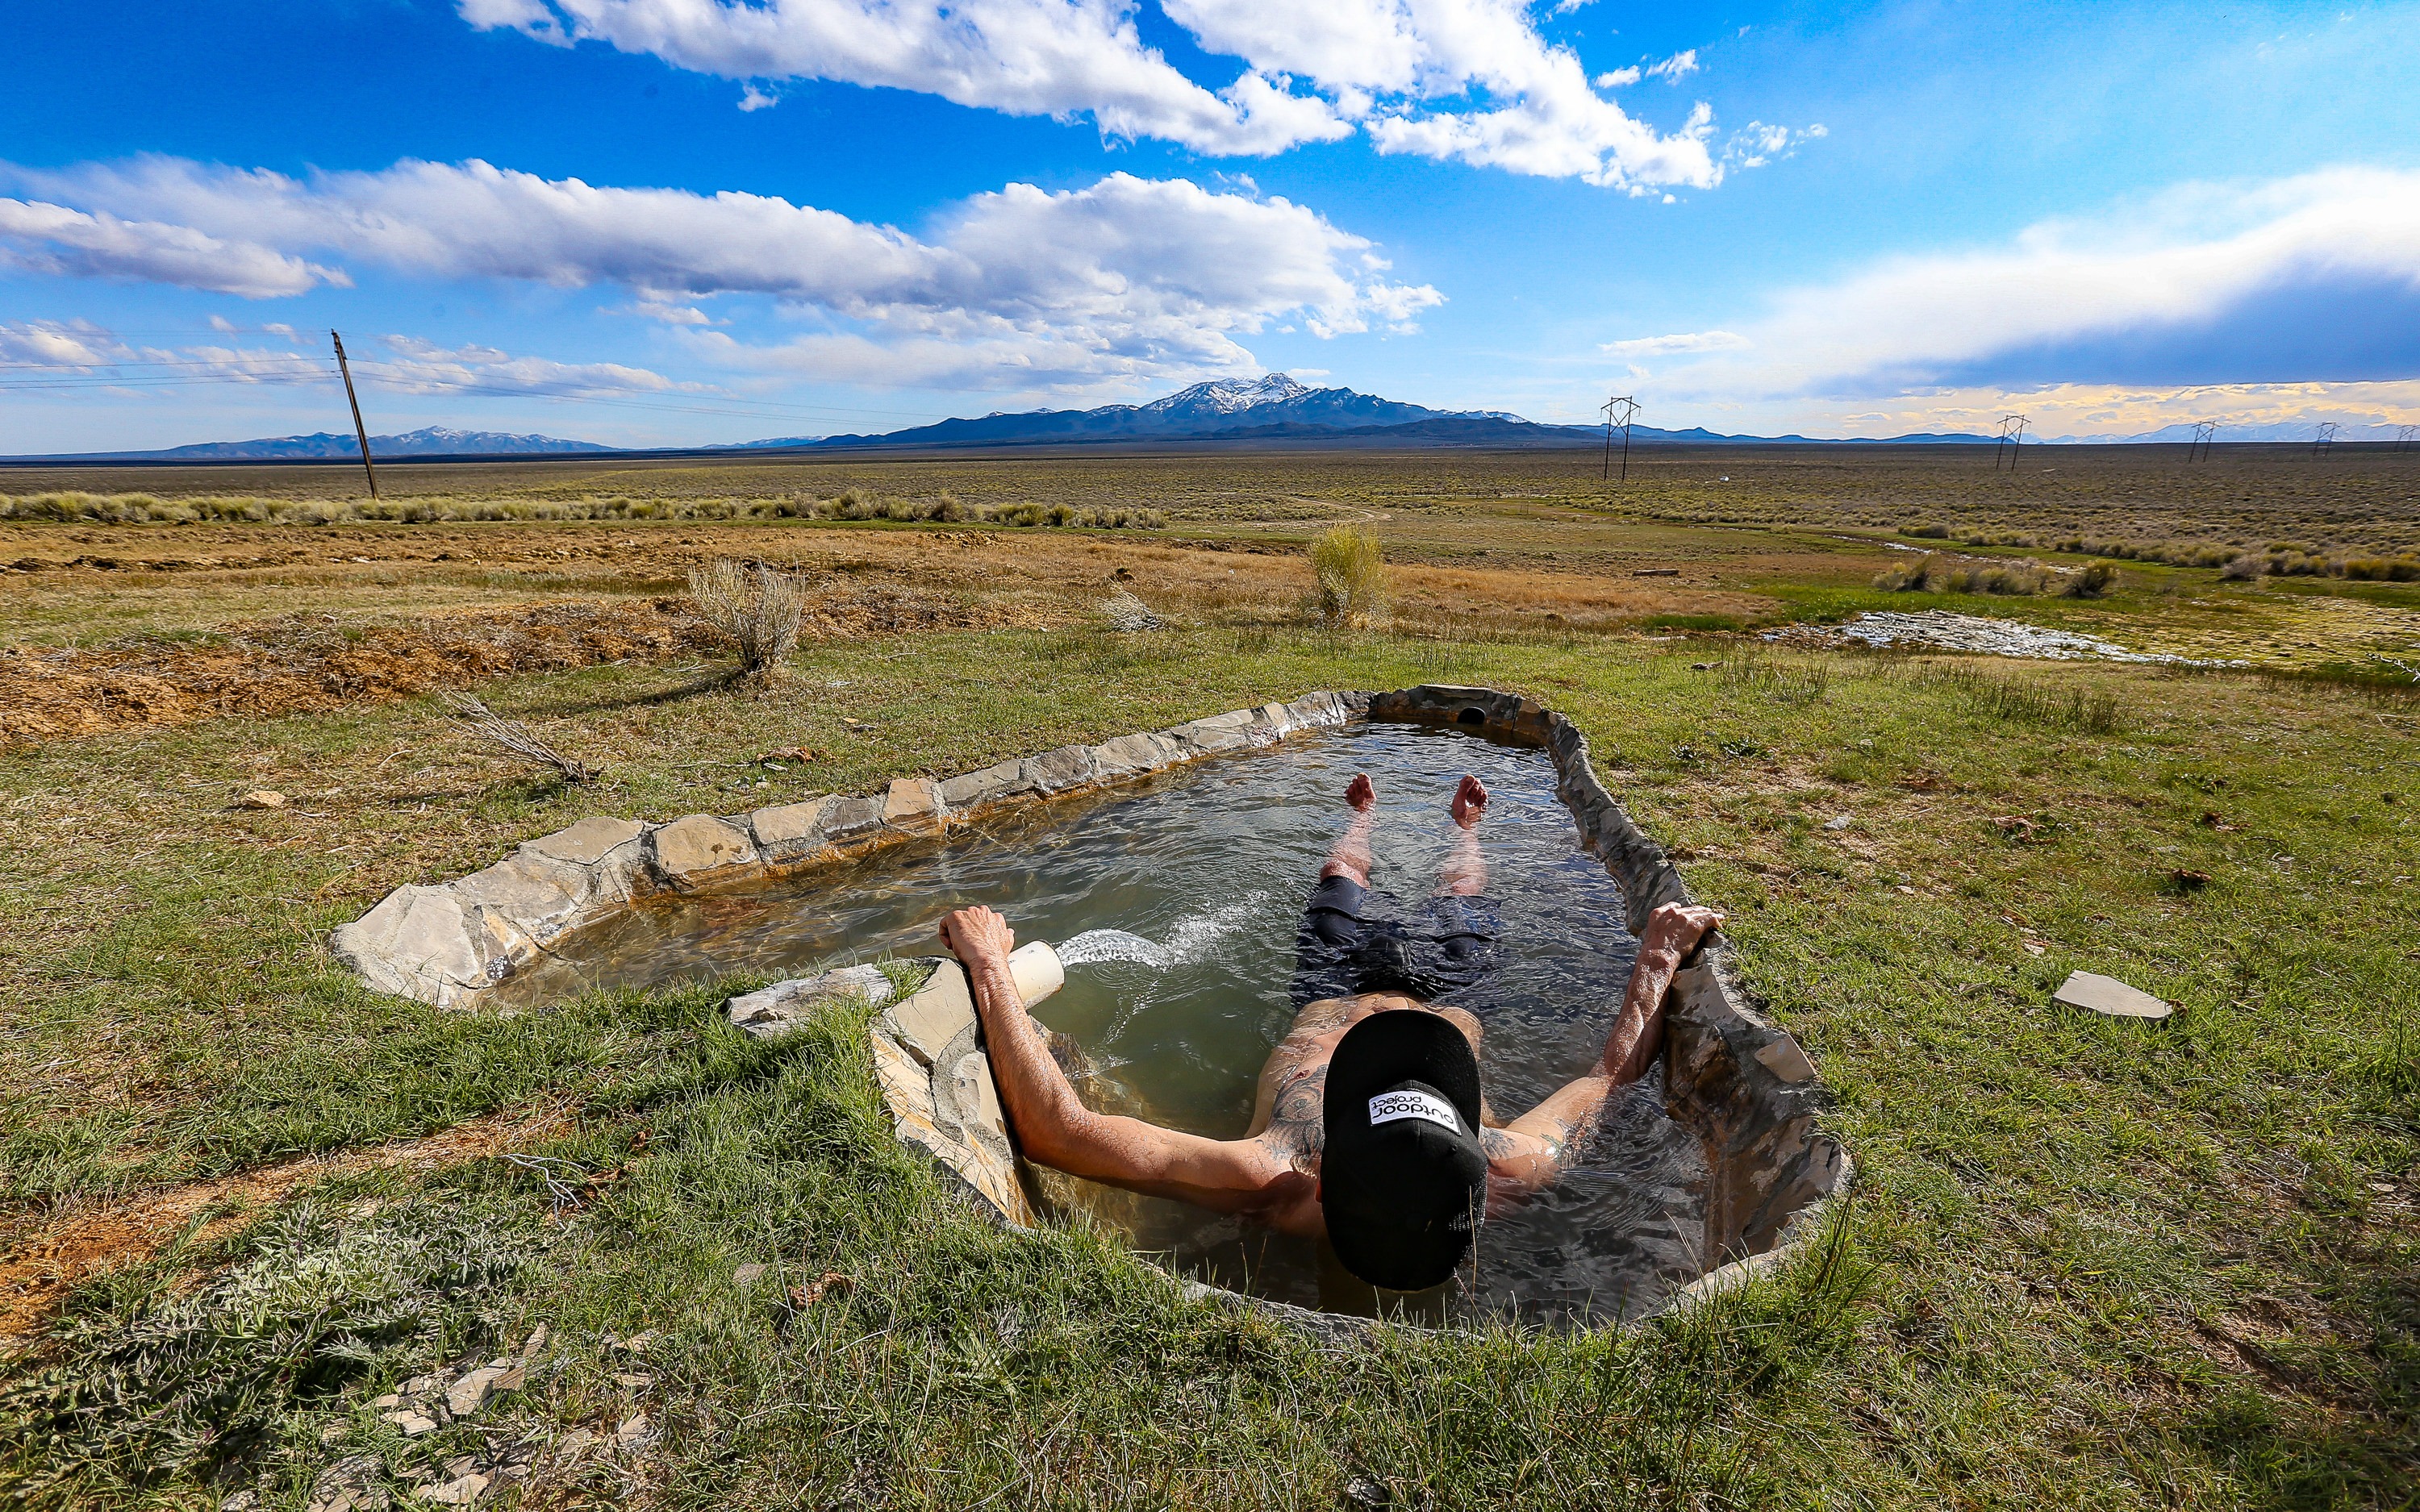 Nature Nudist - The Naked Truth About Hot Springs | Outdoor Project